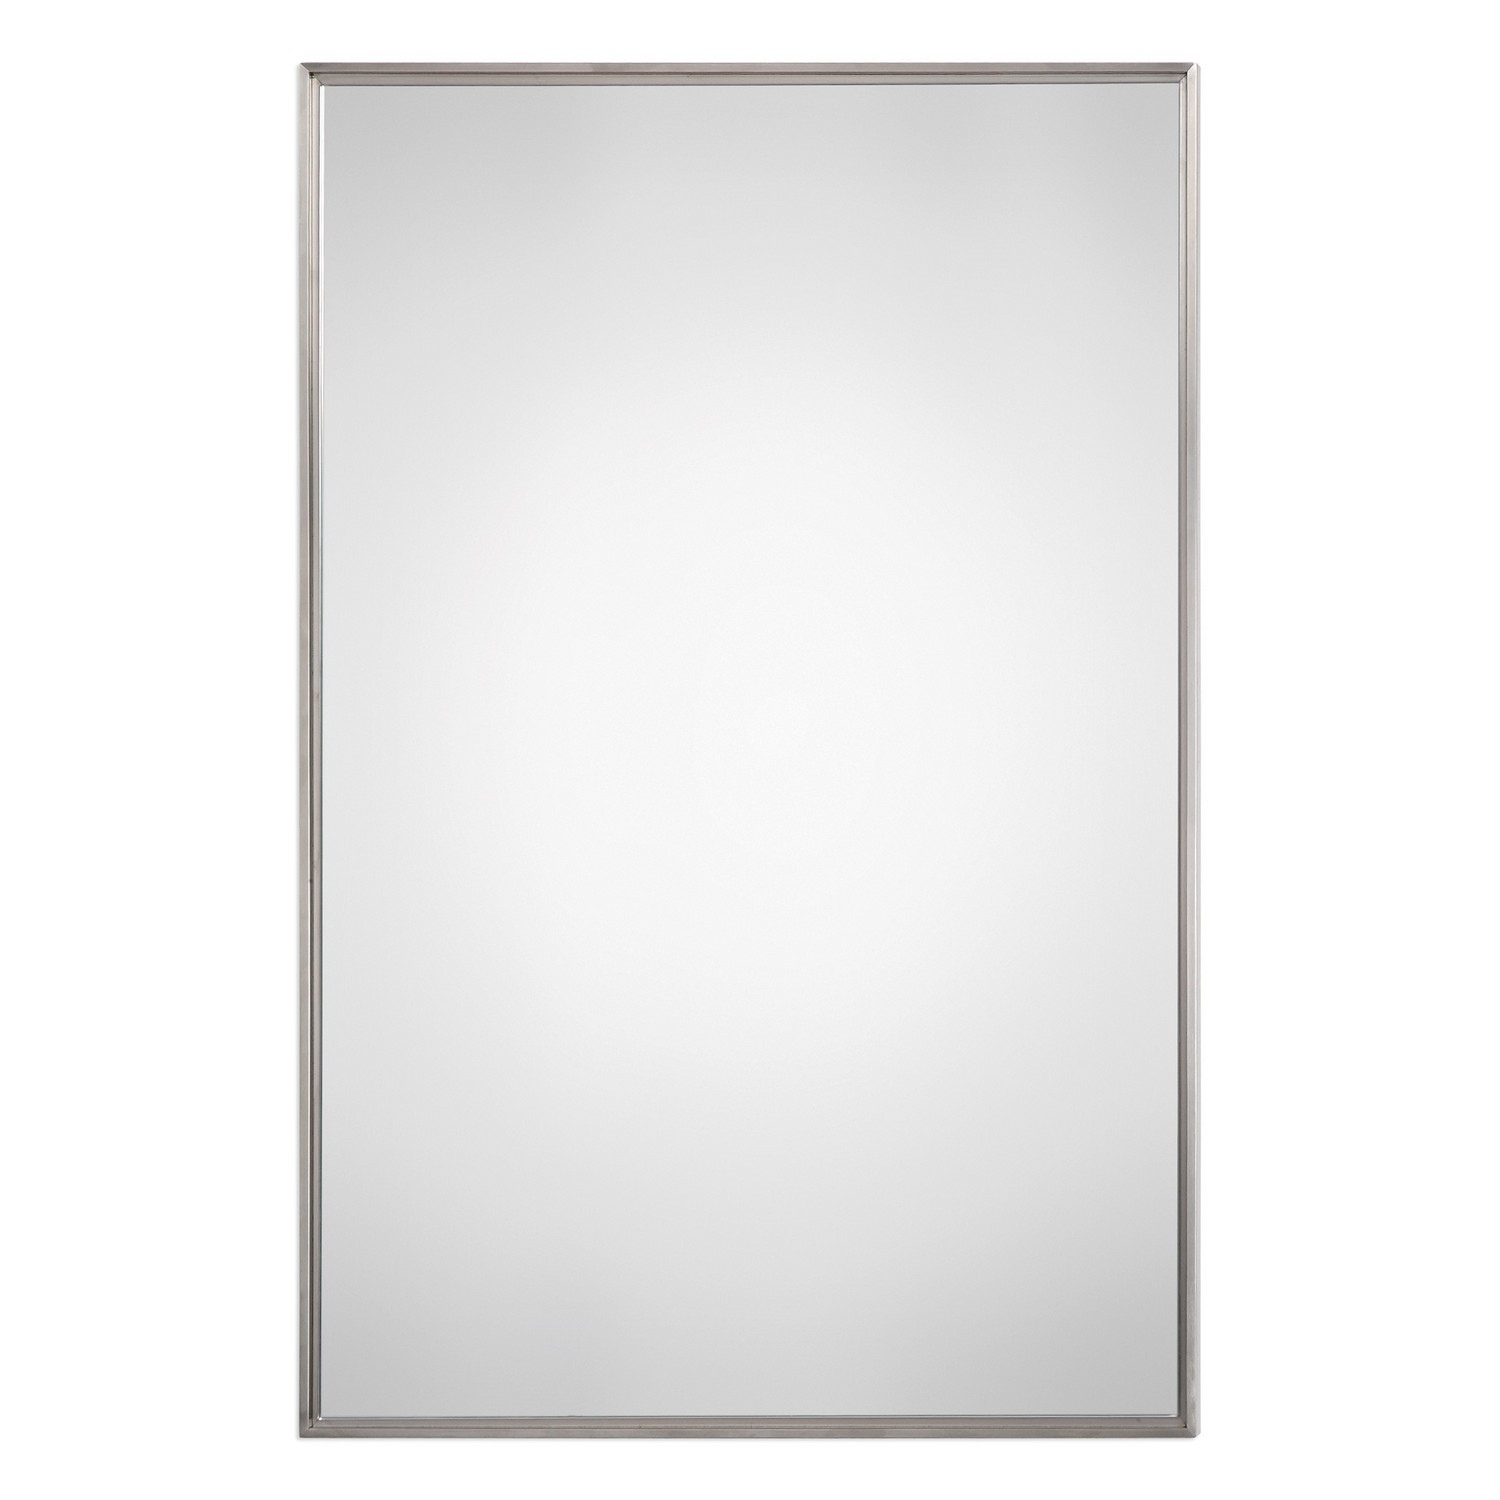 Uttermost W00411 Mirror - Brushed Stainless Steel